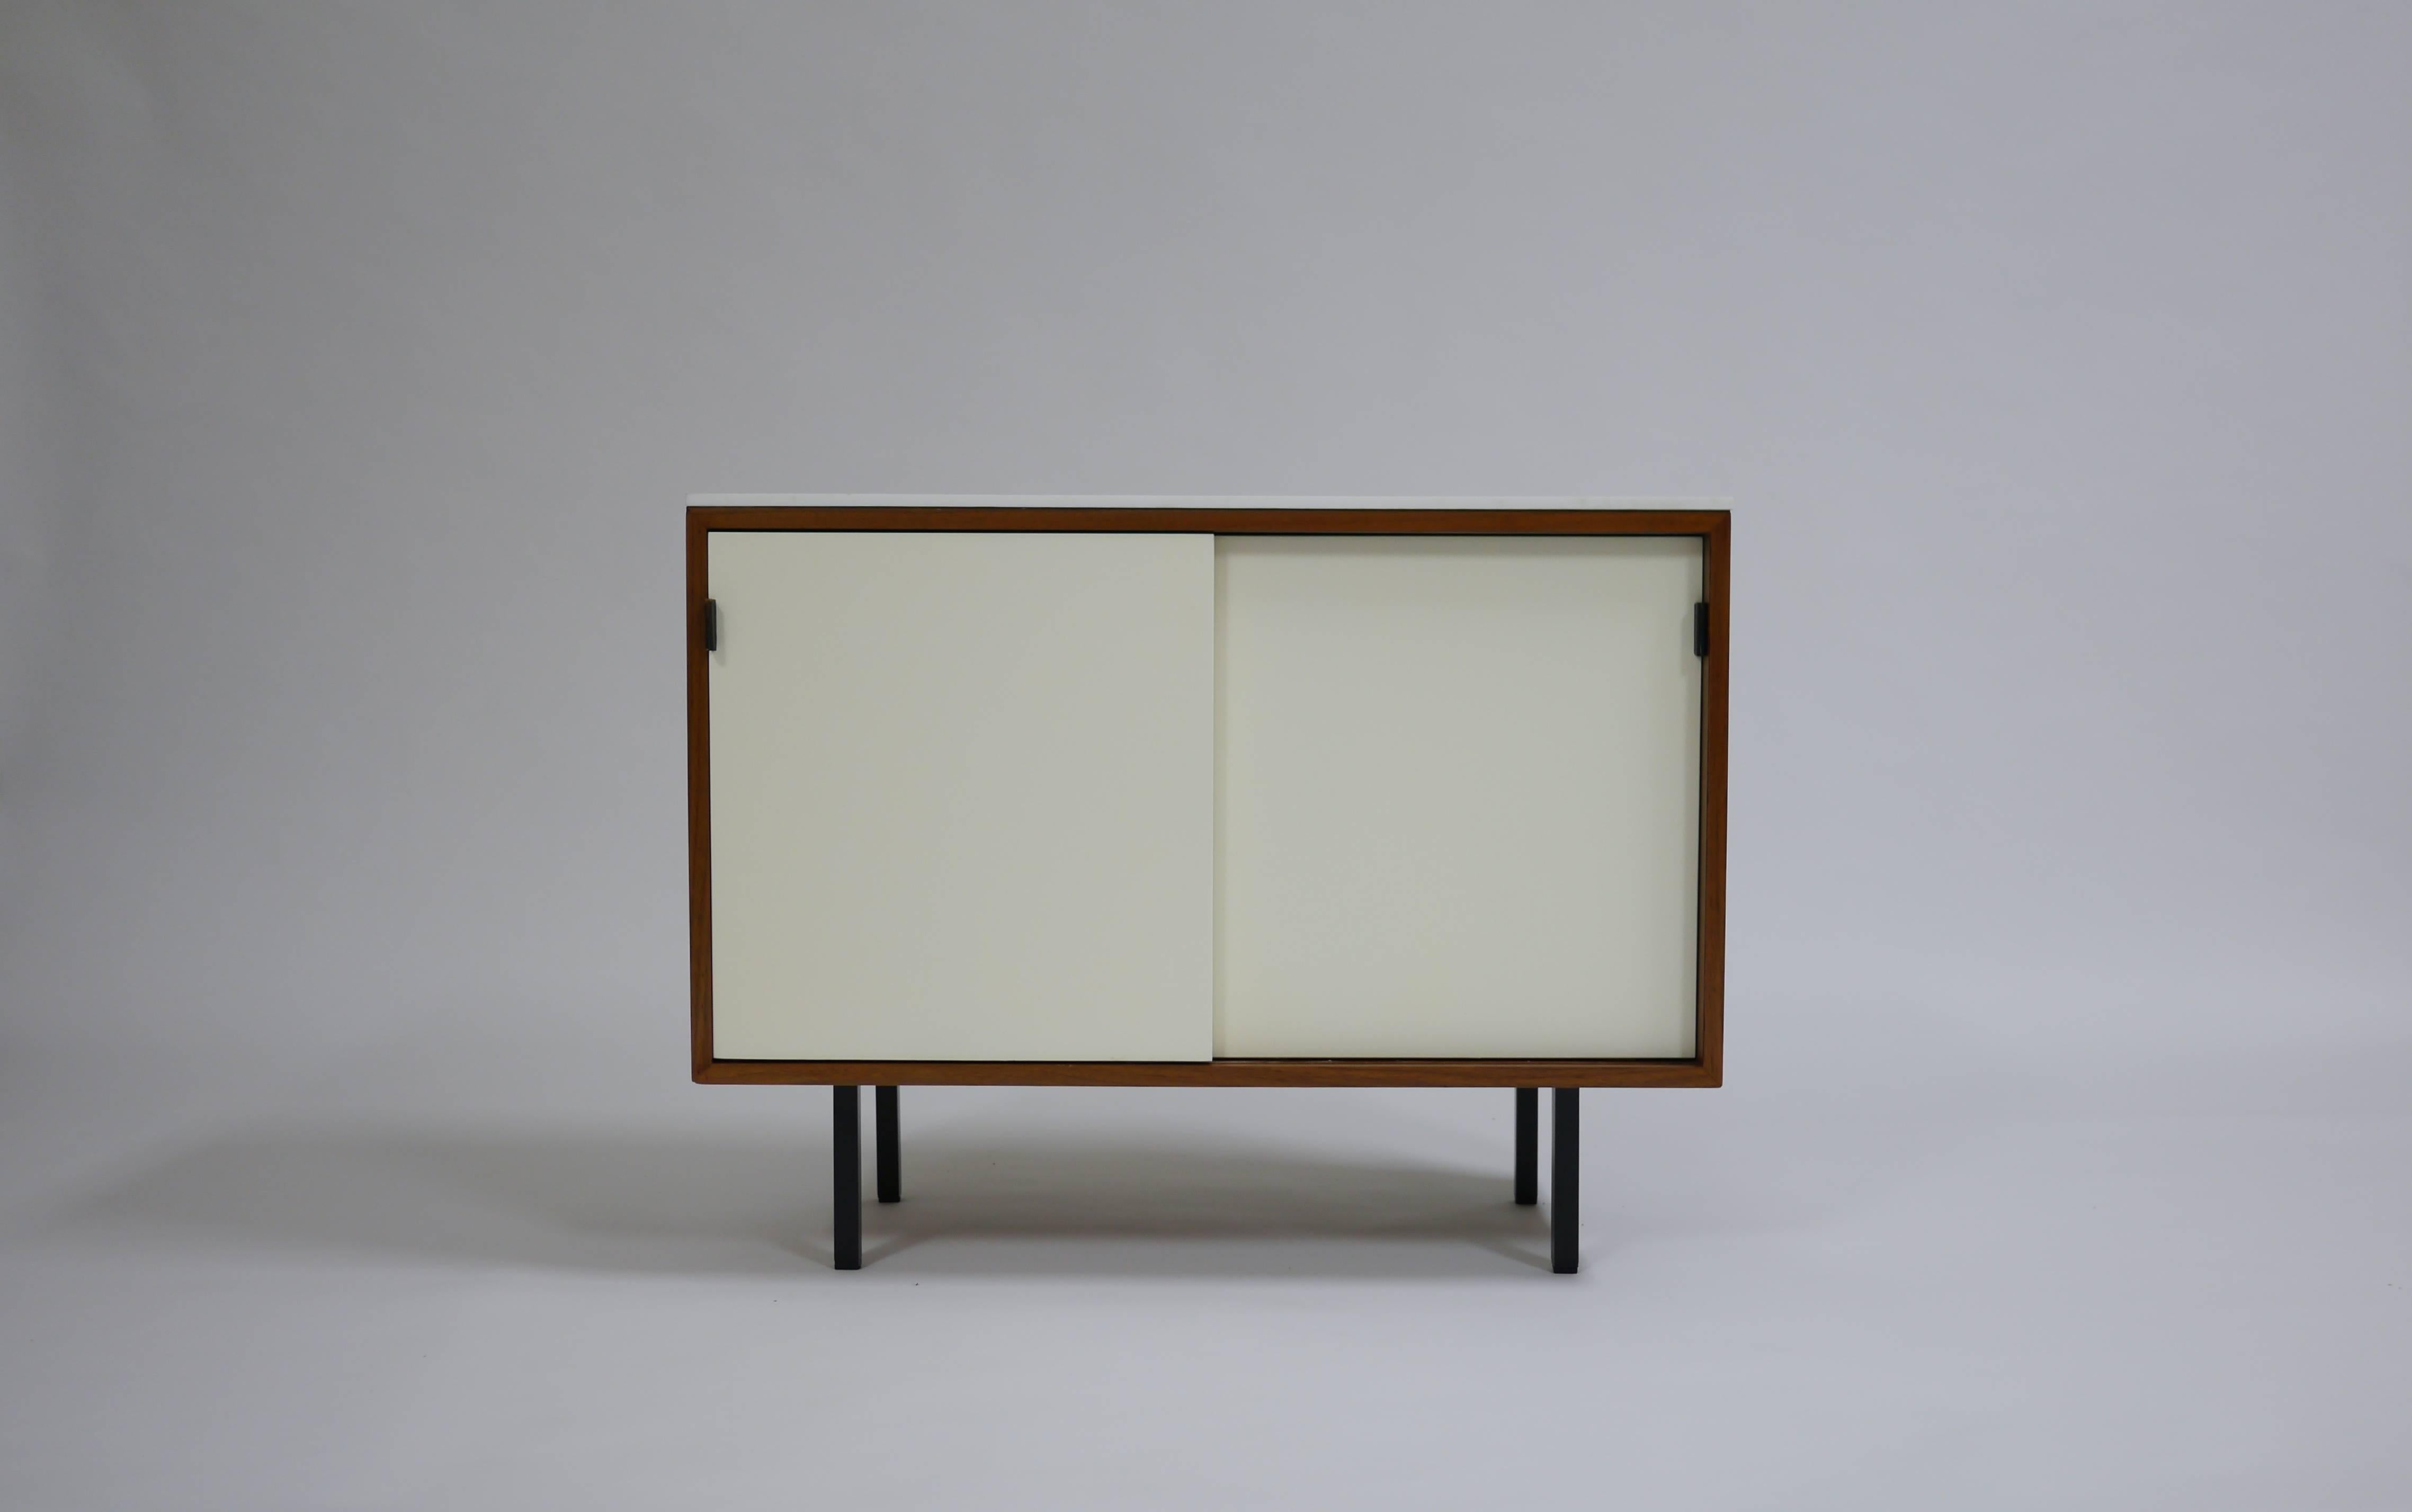 Pair of Knoll bar credenzas in white lacquer and walnut. The lower having a vitrolite, (white glass). Both have walnut cases, steel legs, oak lined interiors and walnut laminate tops.